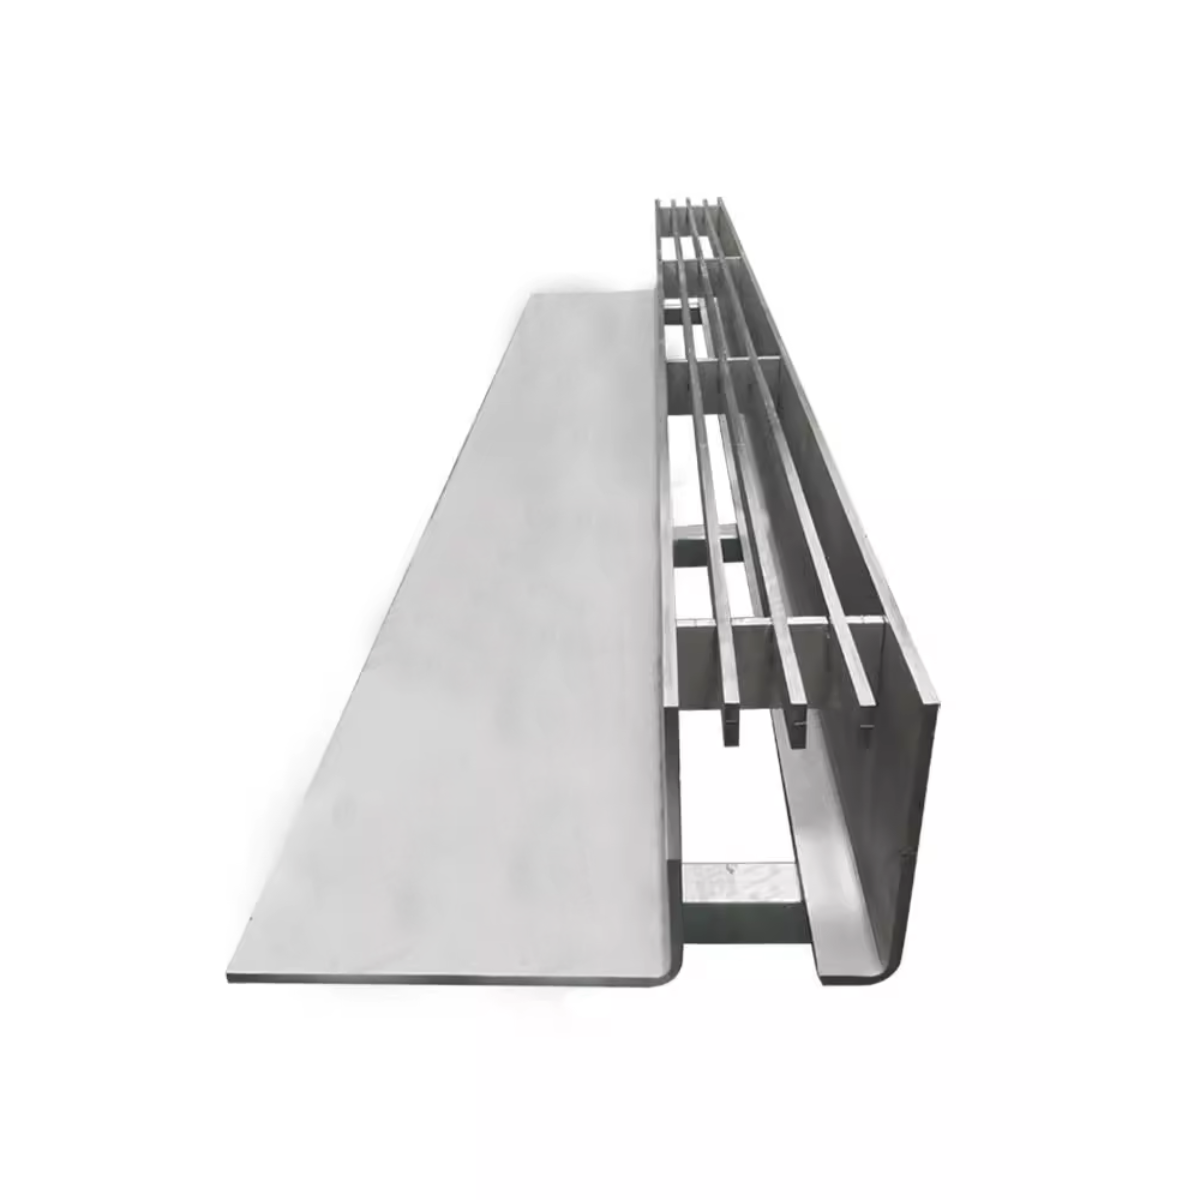 Prefabricated resin gutter cover Stainless steel linear drainage system Curved invisible sink cover Slit cover plate